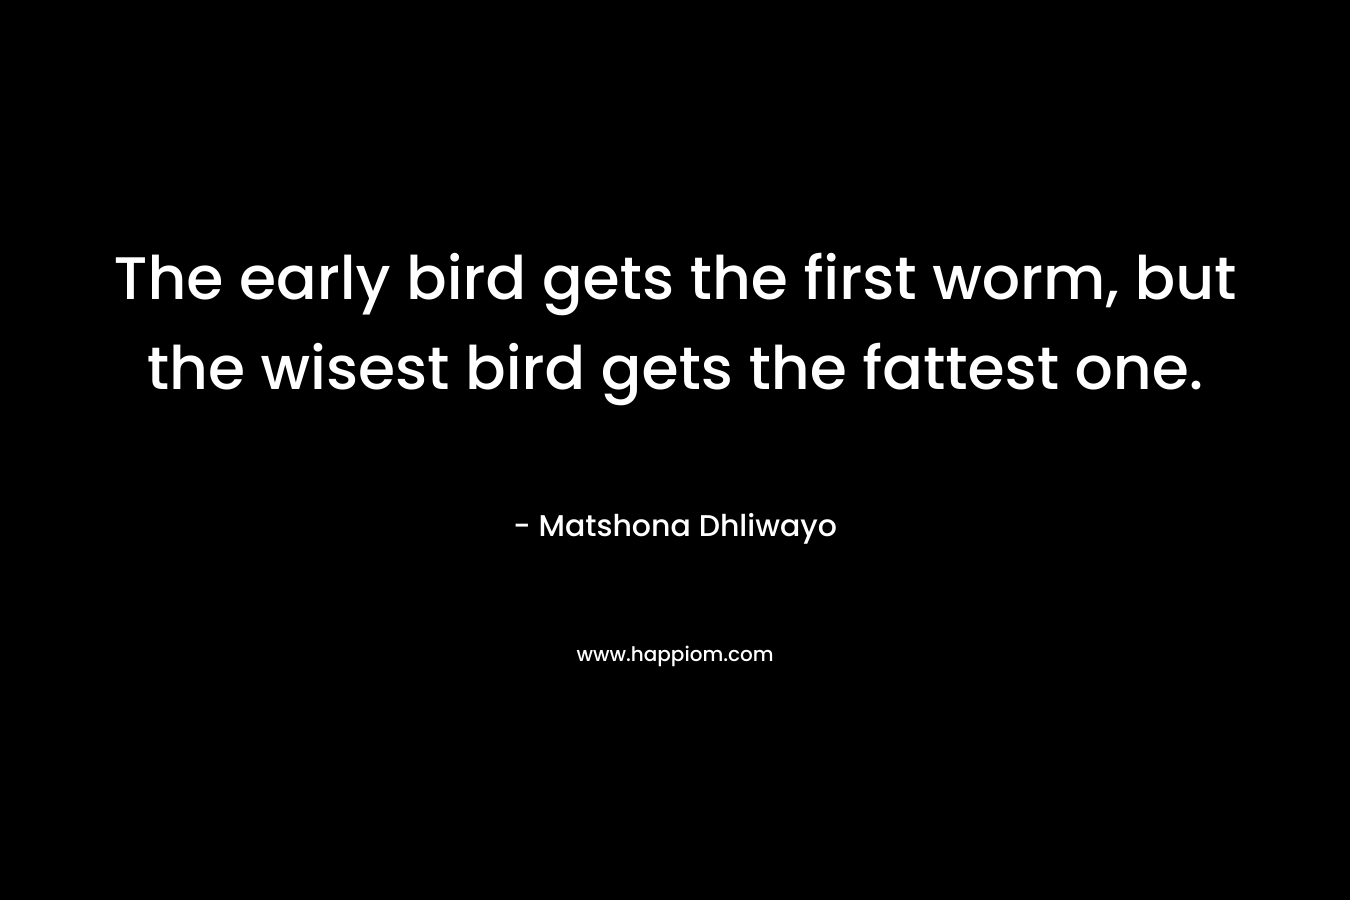 The early bird gets the first worm, but the wisest bird gets the fattest one.